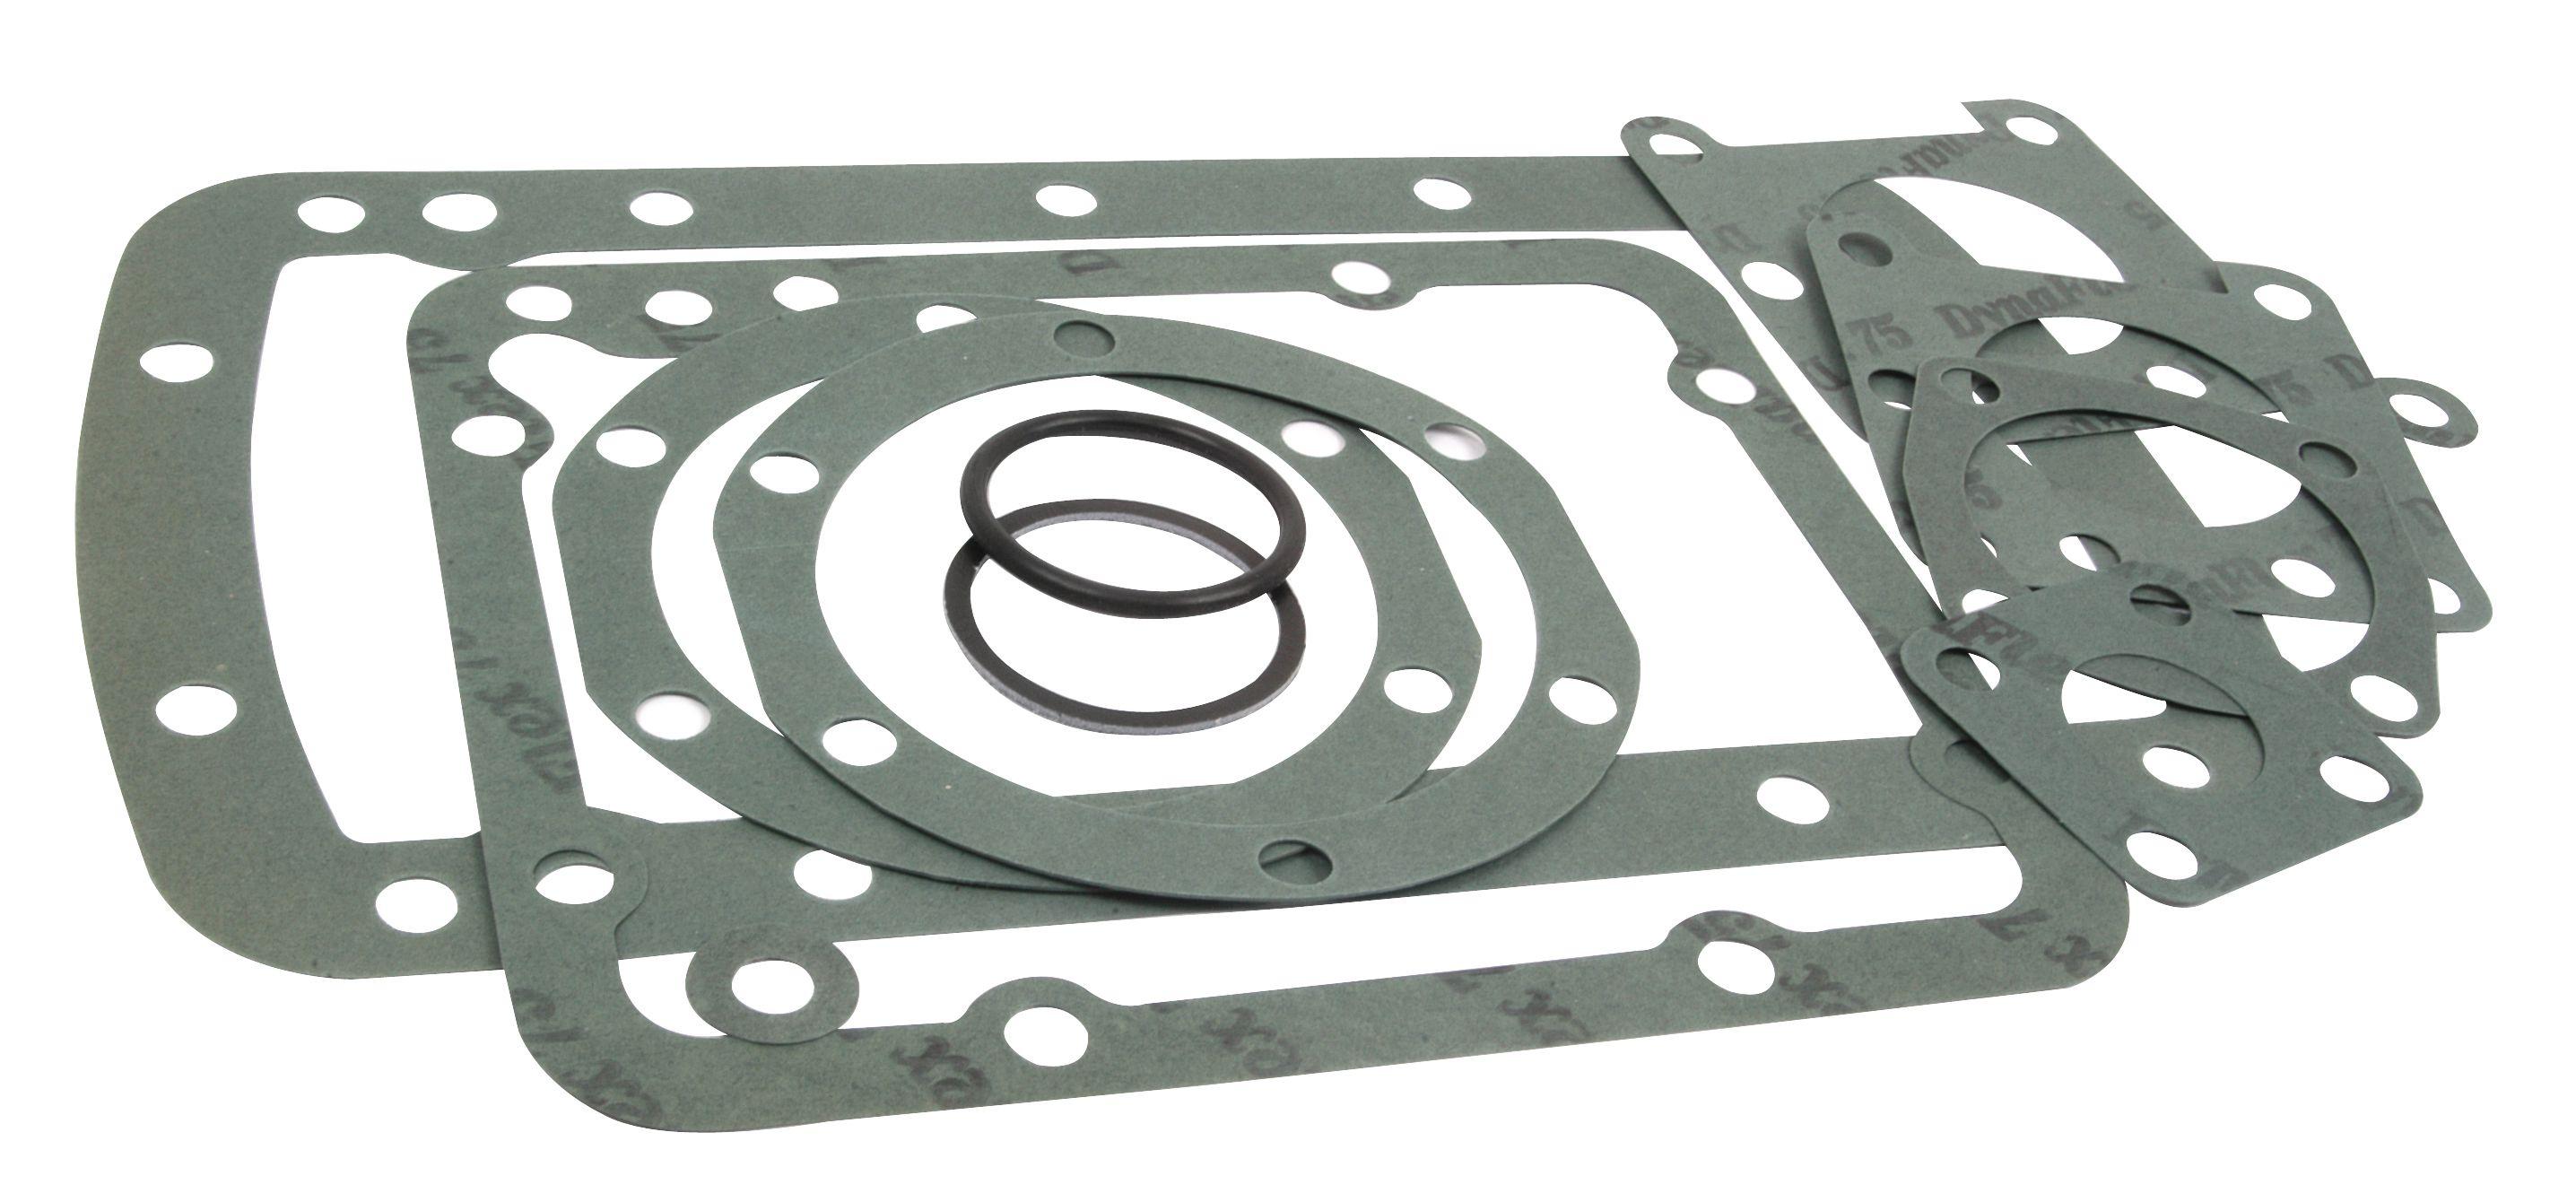 FORD NEW HOLLAND LIFT COVER REPAIR KIT 61504